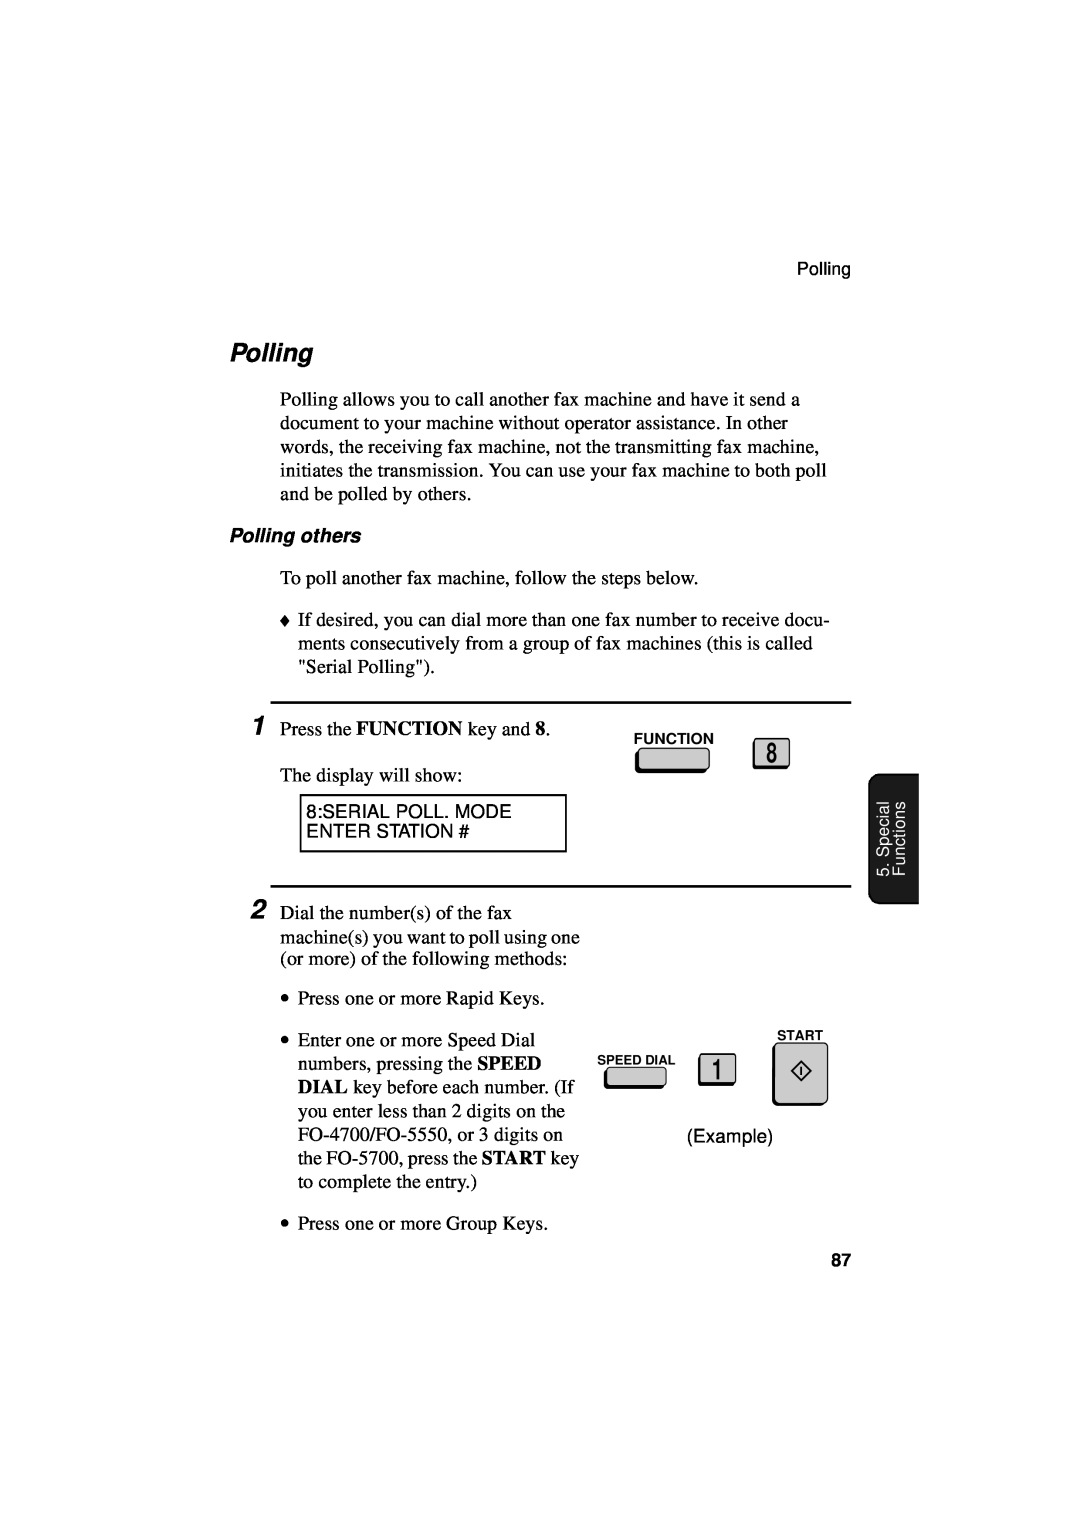 Sharp FO-5550, FO-5700, FO-4700 operation manual Polling others 